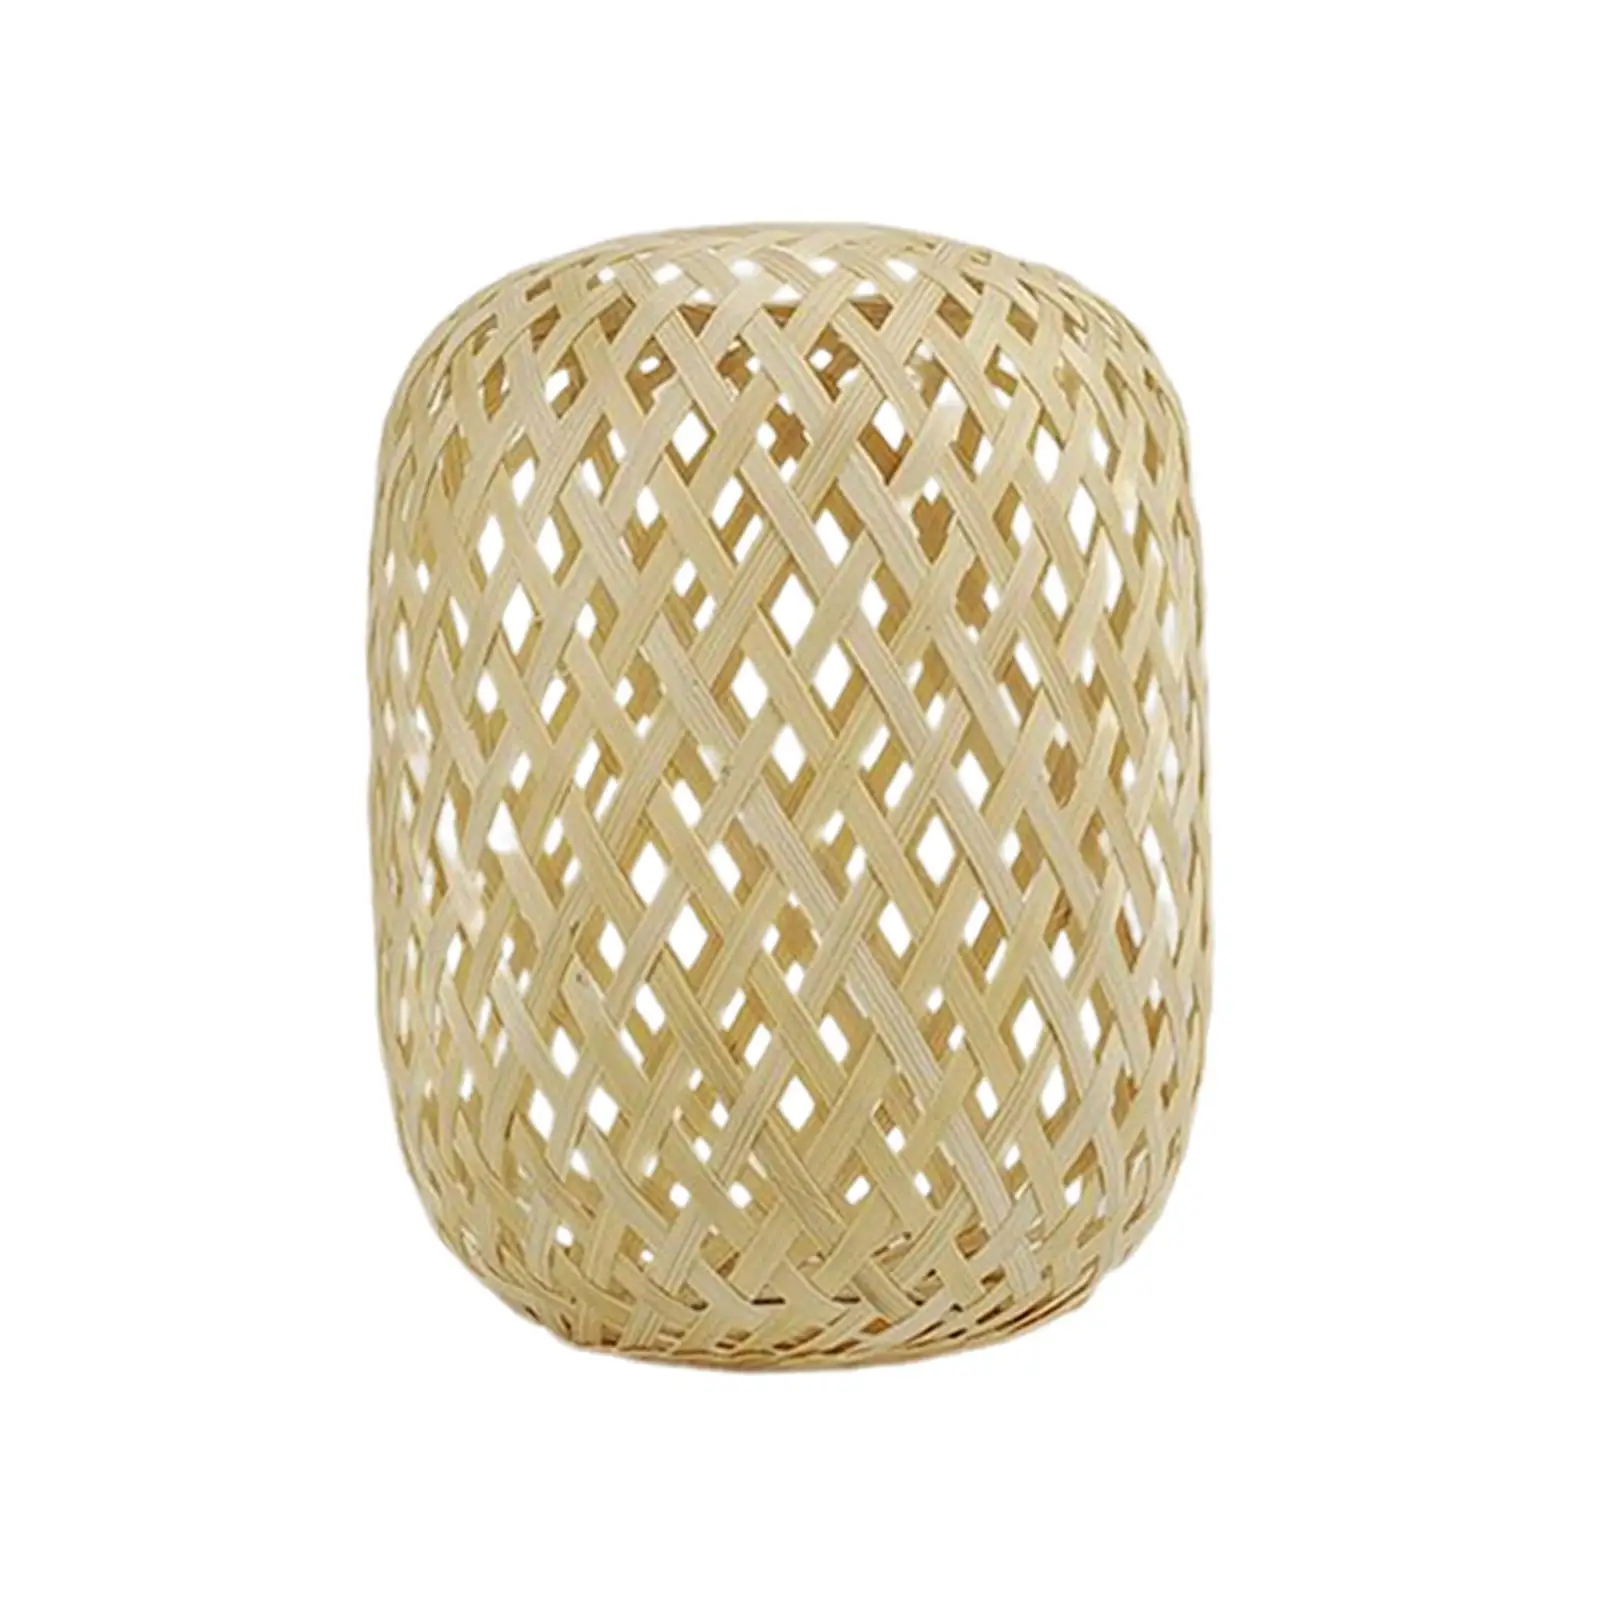 Bamboo Handwoven Lamp Shade Light Cover Removable Retro Style Decoration Chandelier Cover for Bedroom Living Room Teahouse Hotel